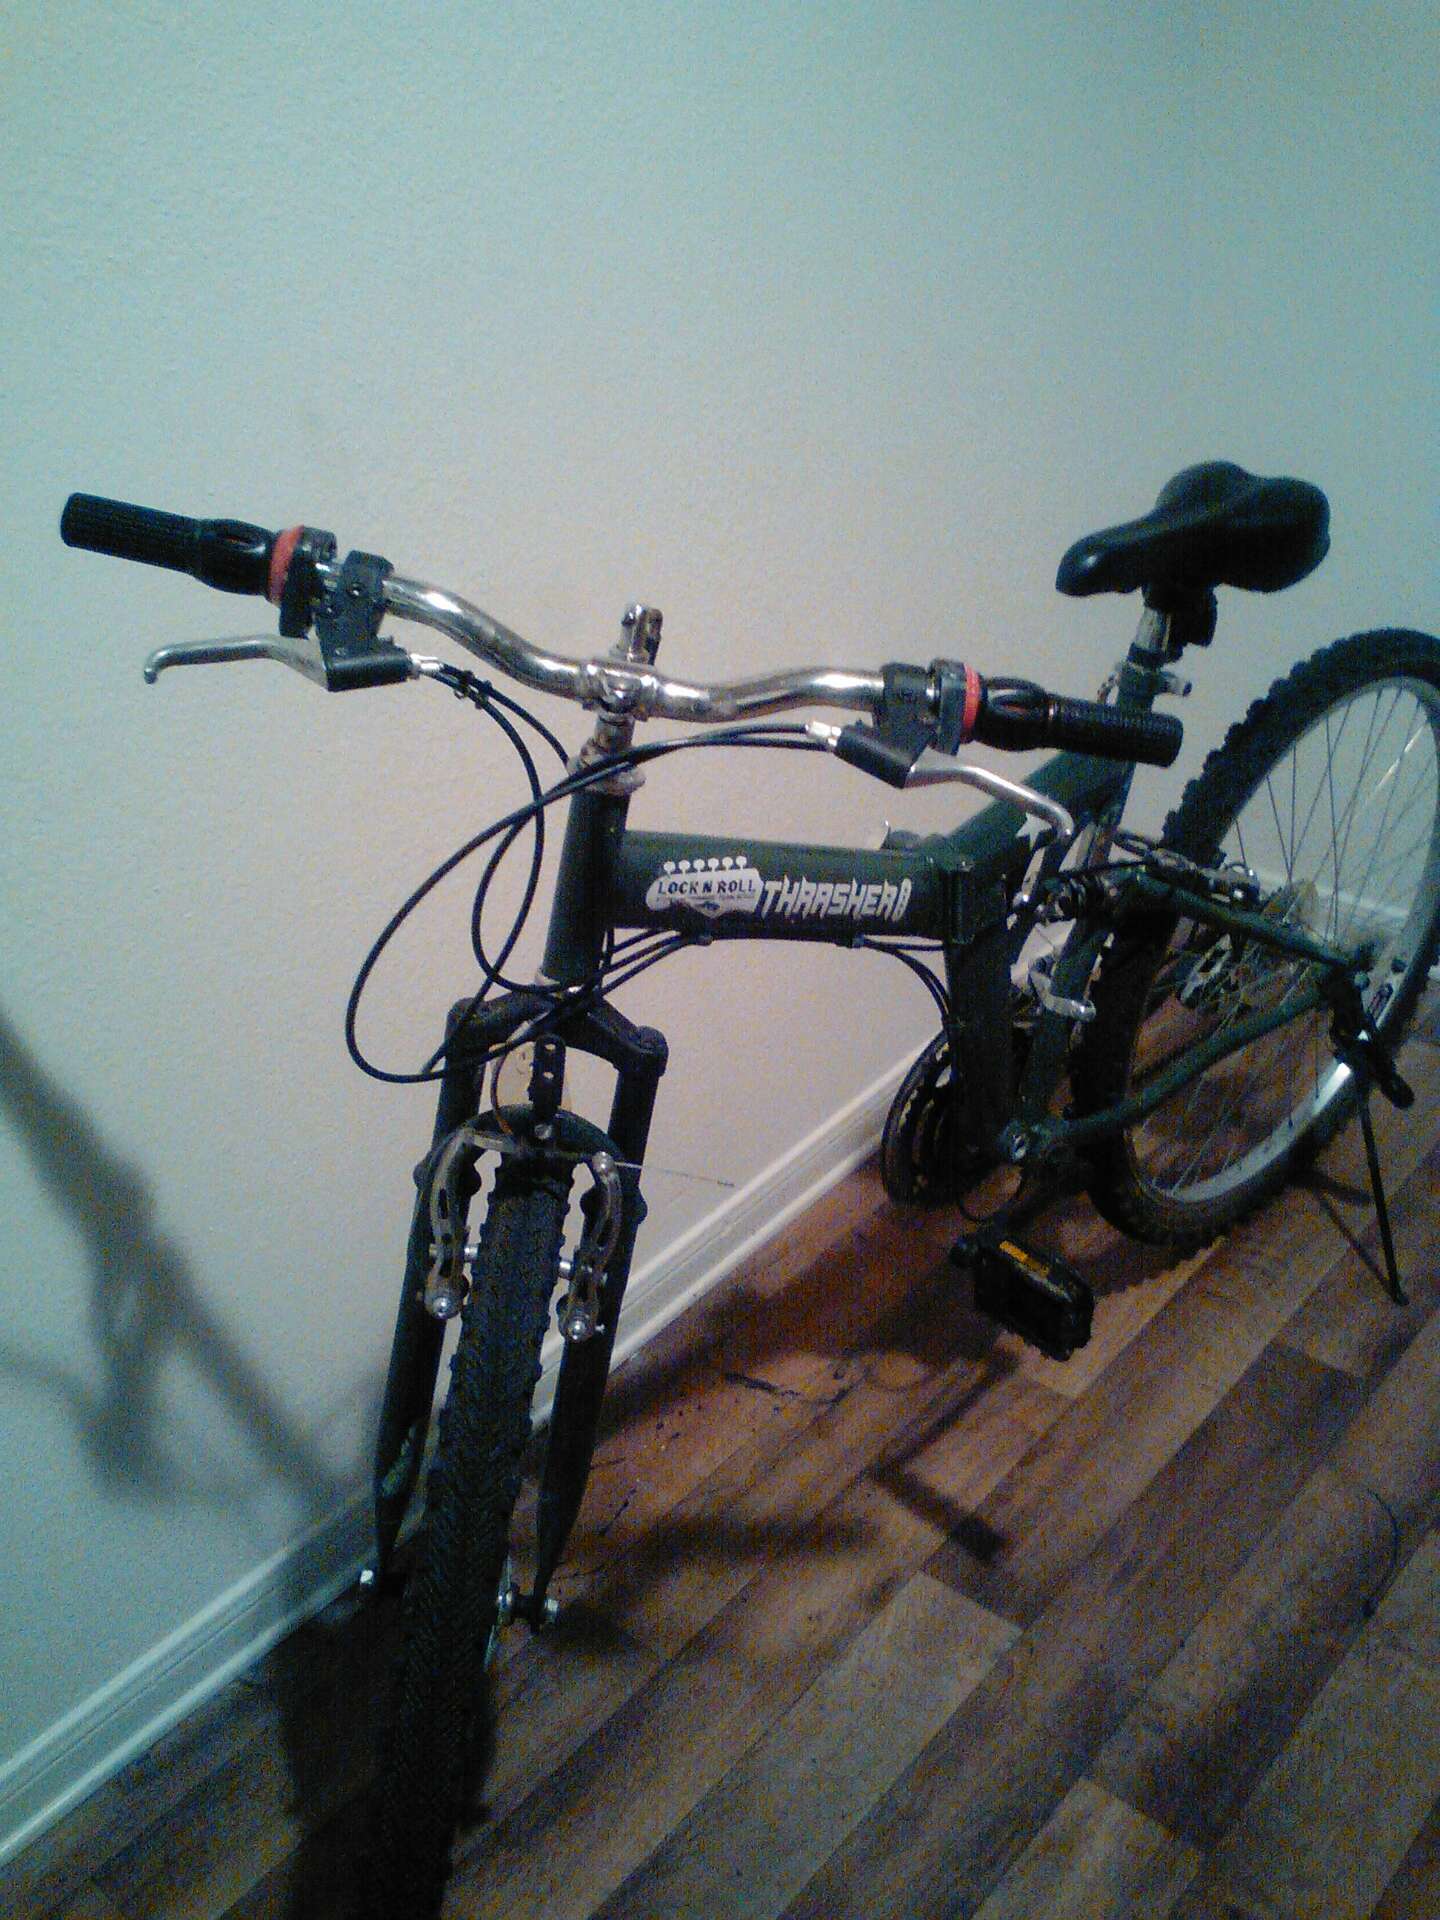 Lock n roll folding bike for sale in Lewisville, TX - 5miles: Buy and Sell